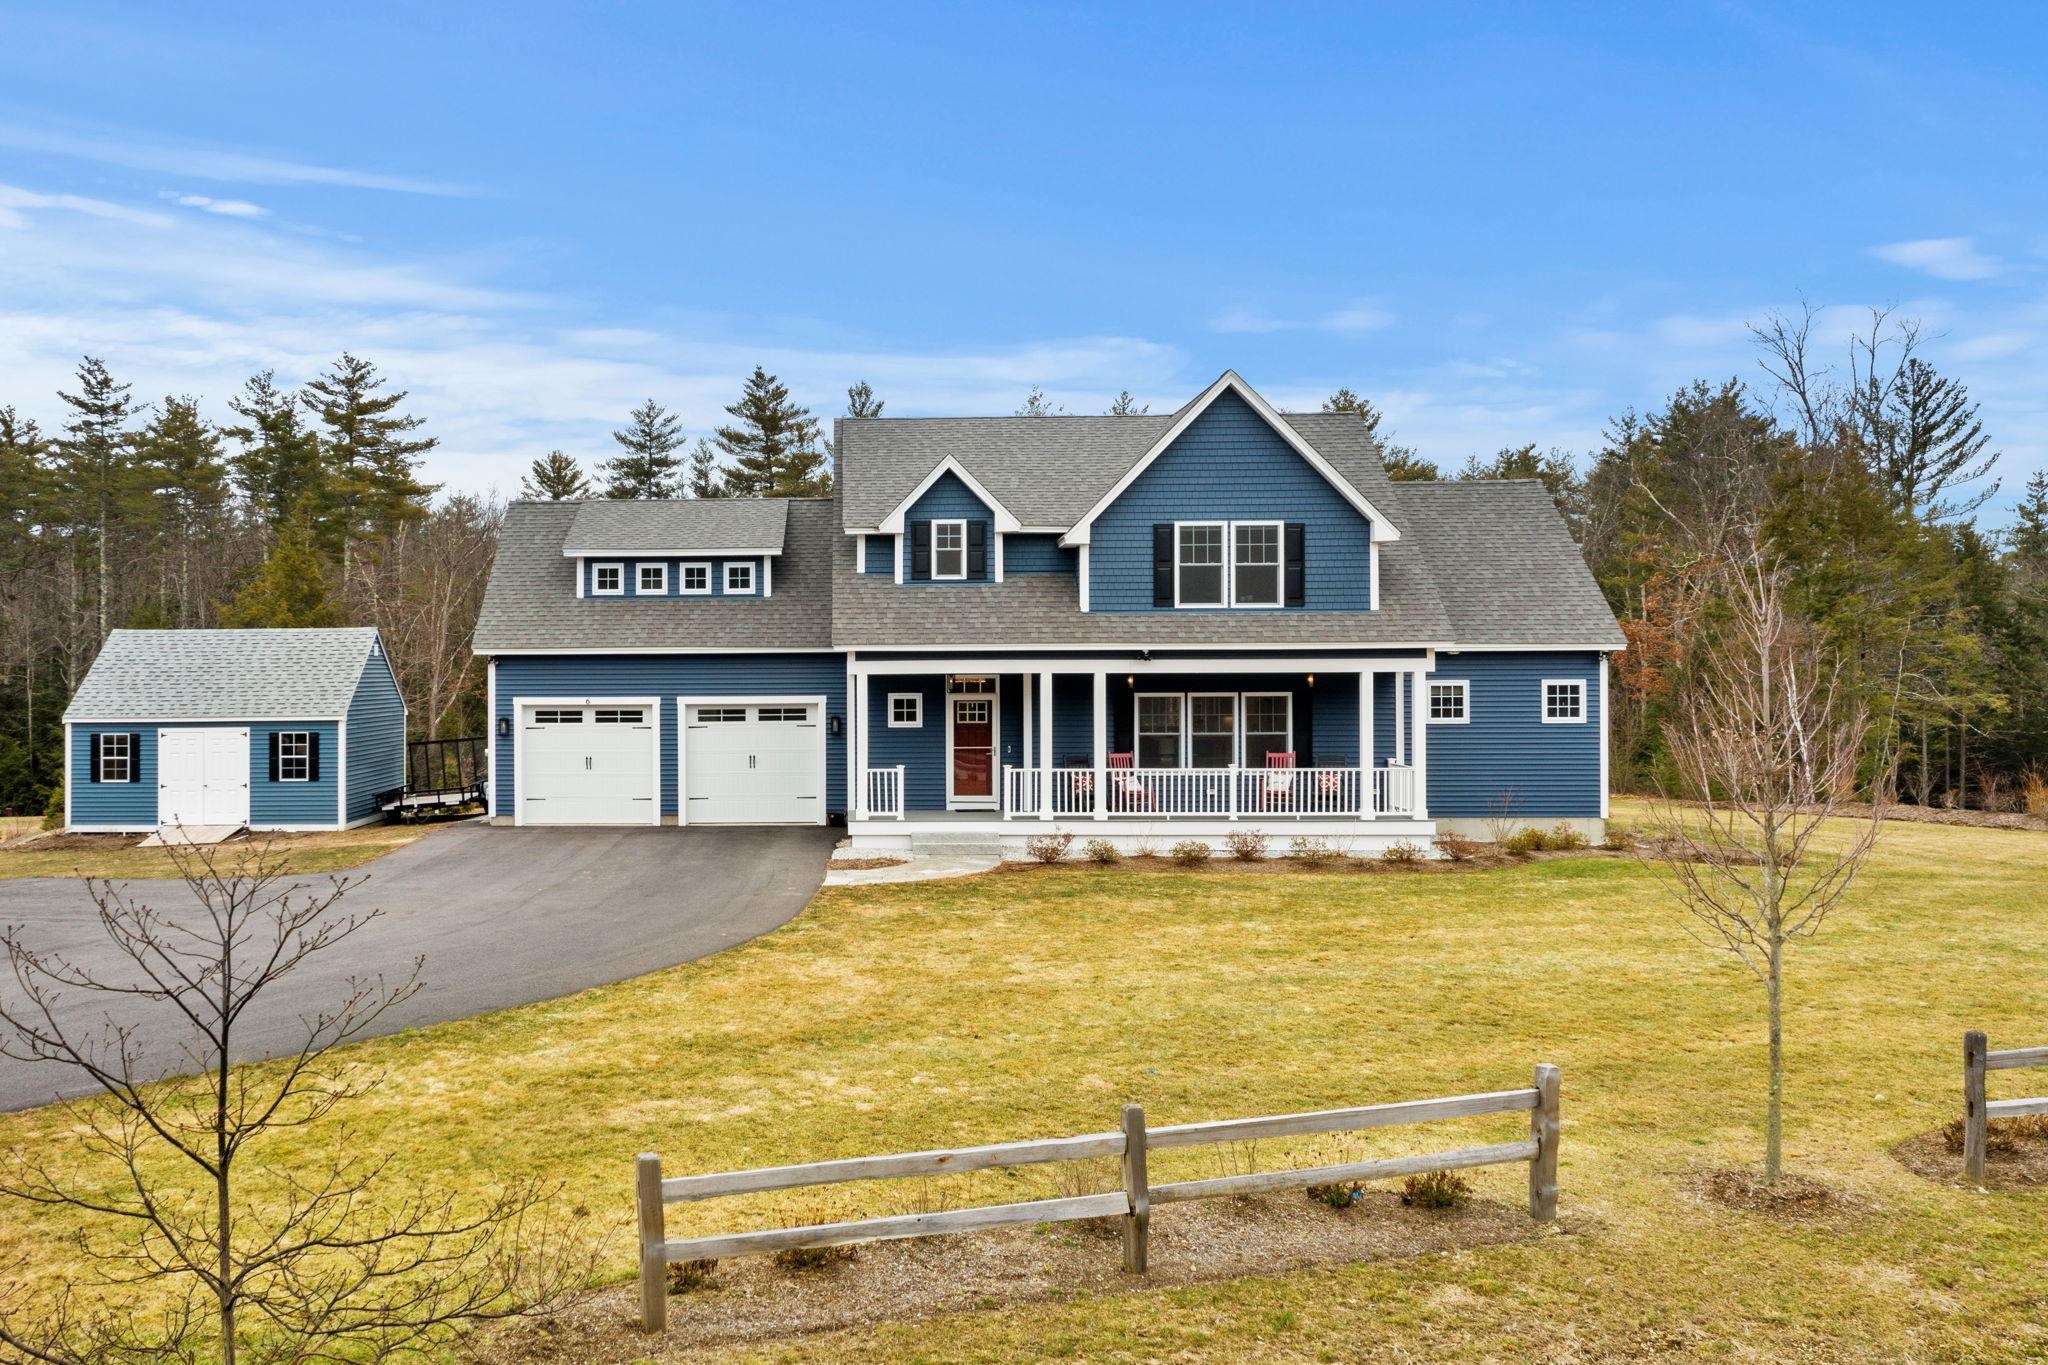 6 Odell Drive, Amherst, NH 03031